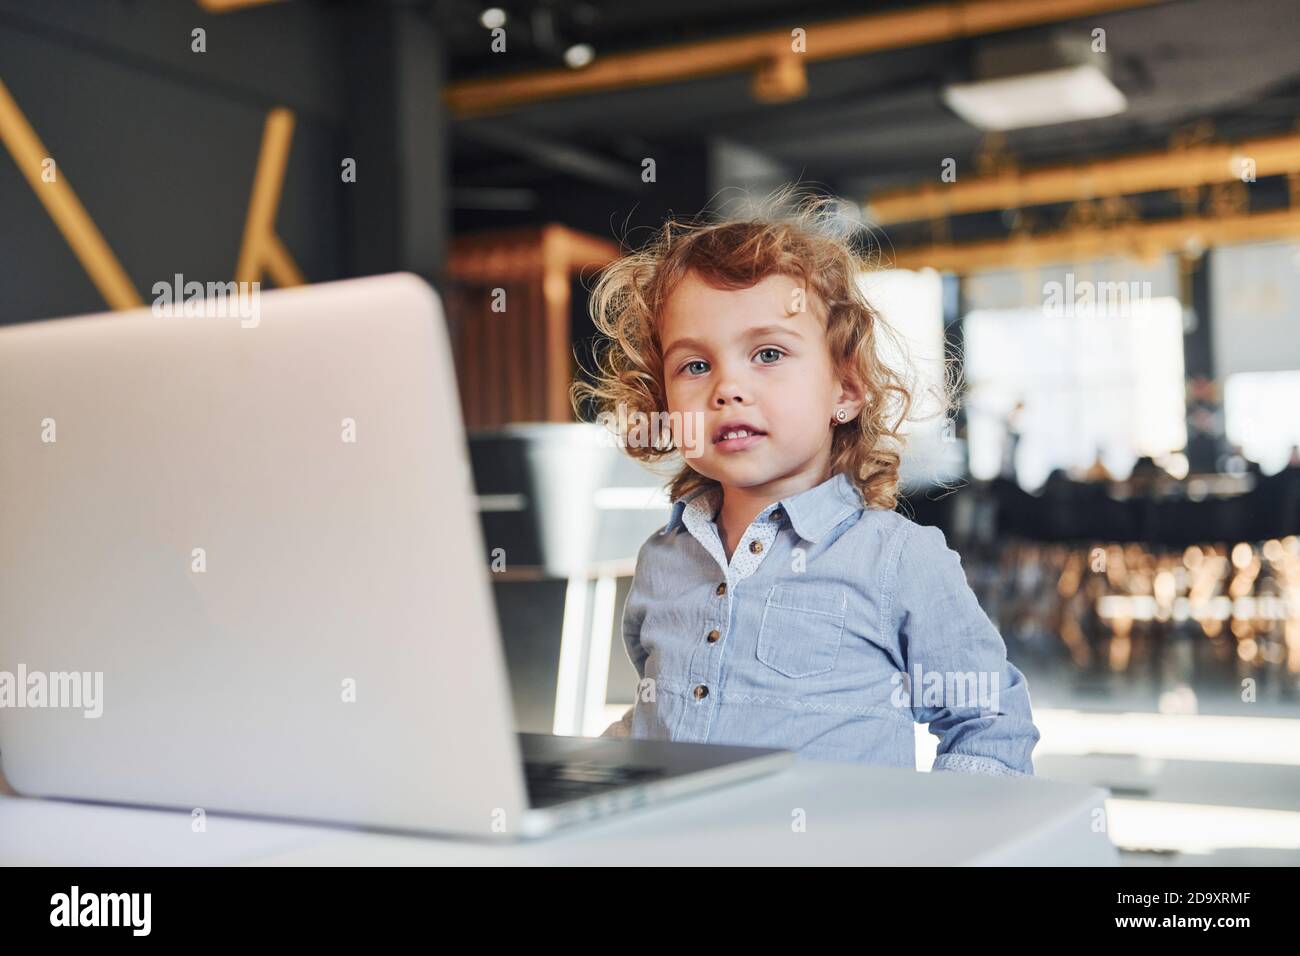 Smart child in casual clothes using laptop for education purposes or fun Stock Photo